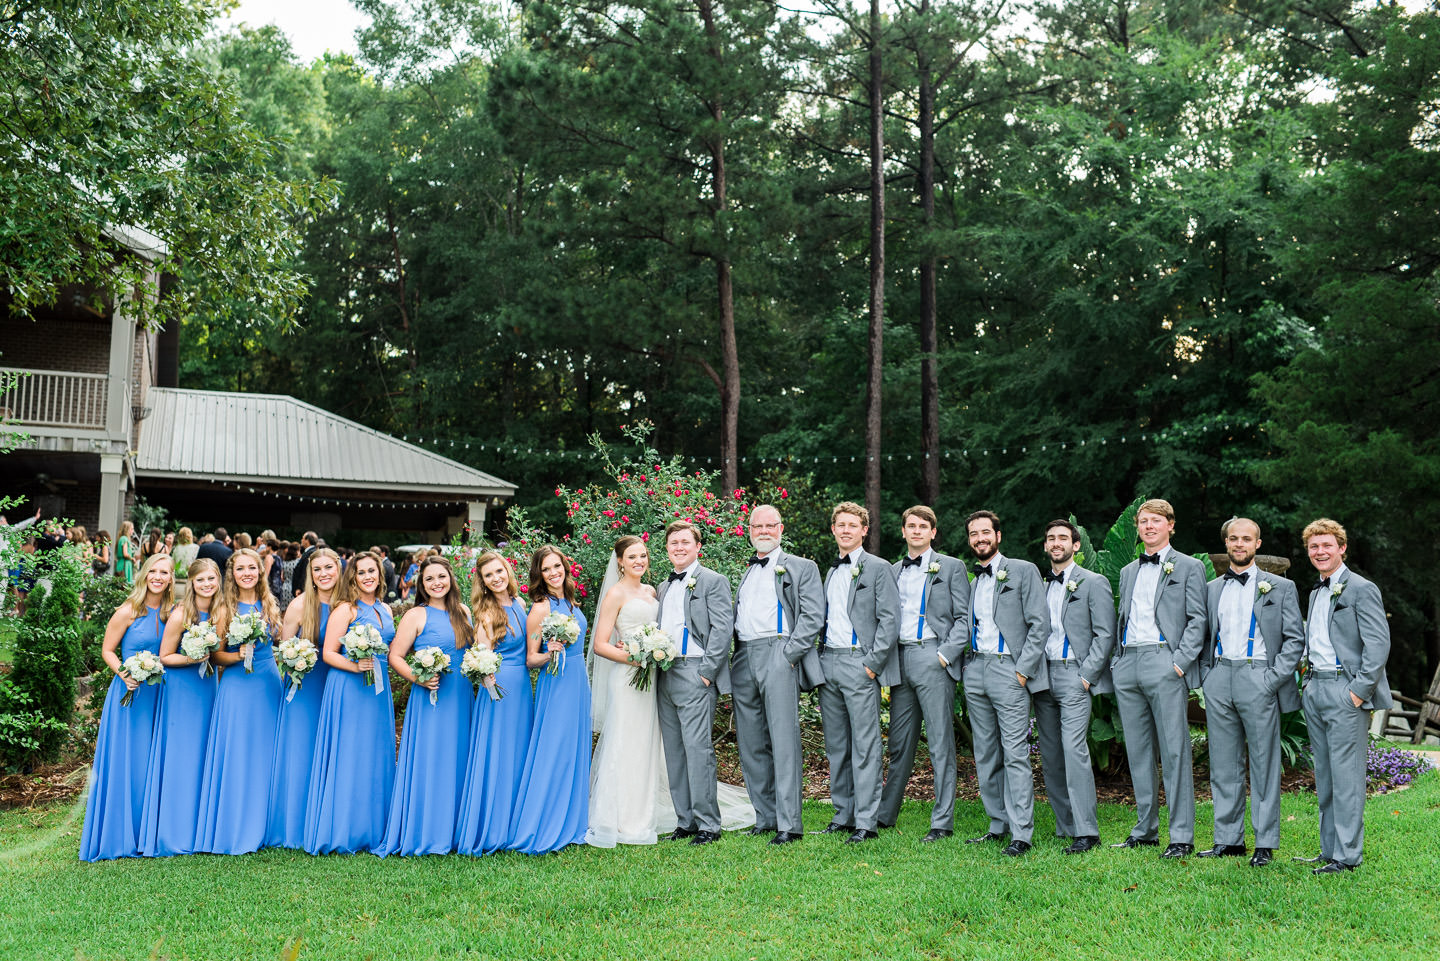 Bride, Bridesmaids, Groom, and Groomsmen smile for a fun portrait following Mississippi wedding ceremony